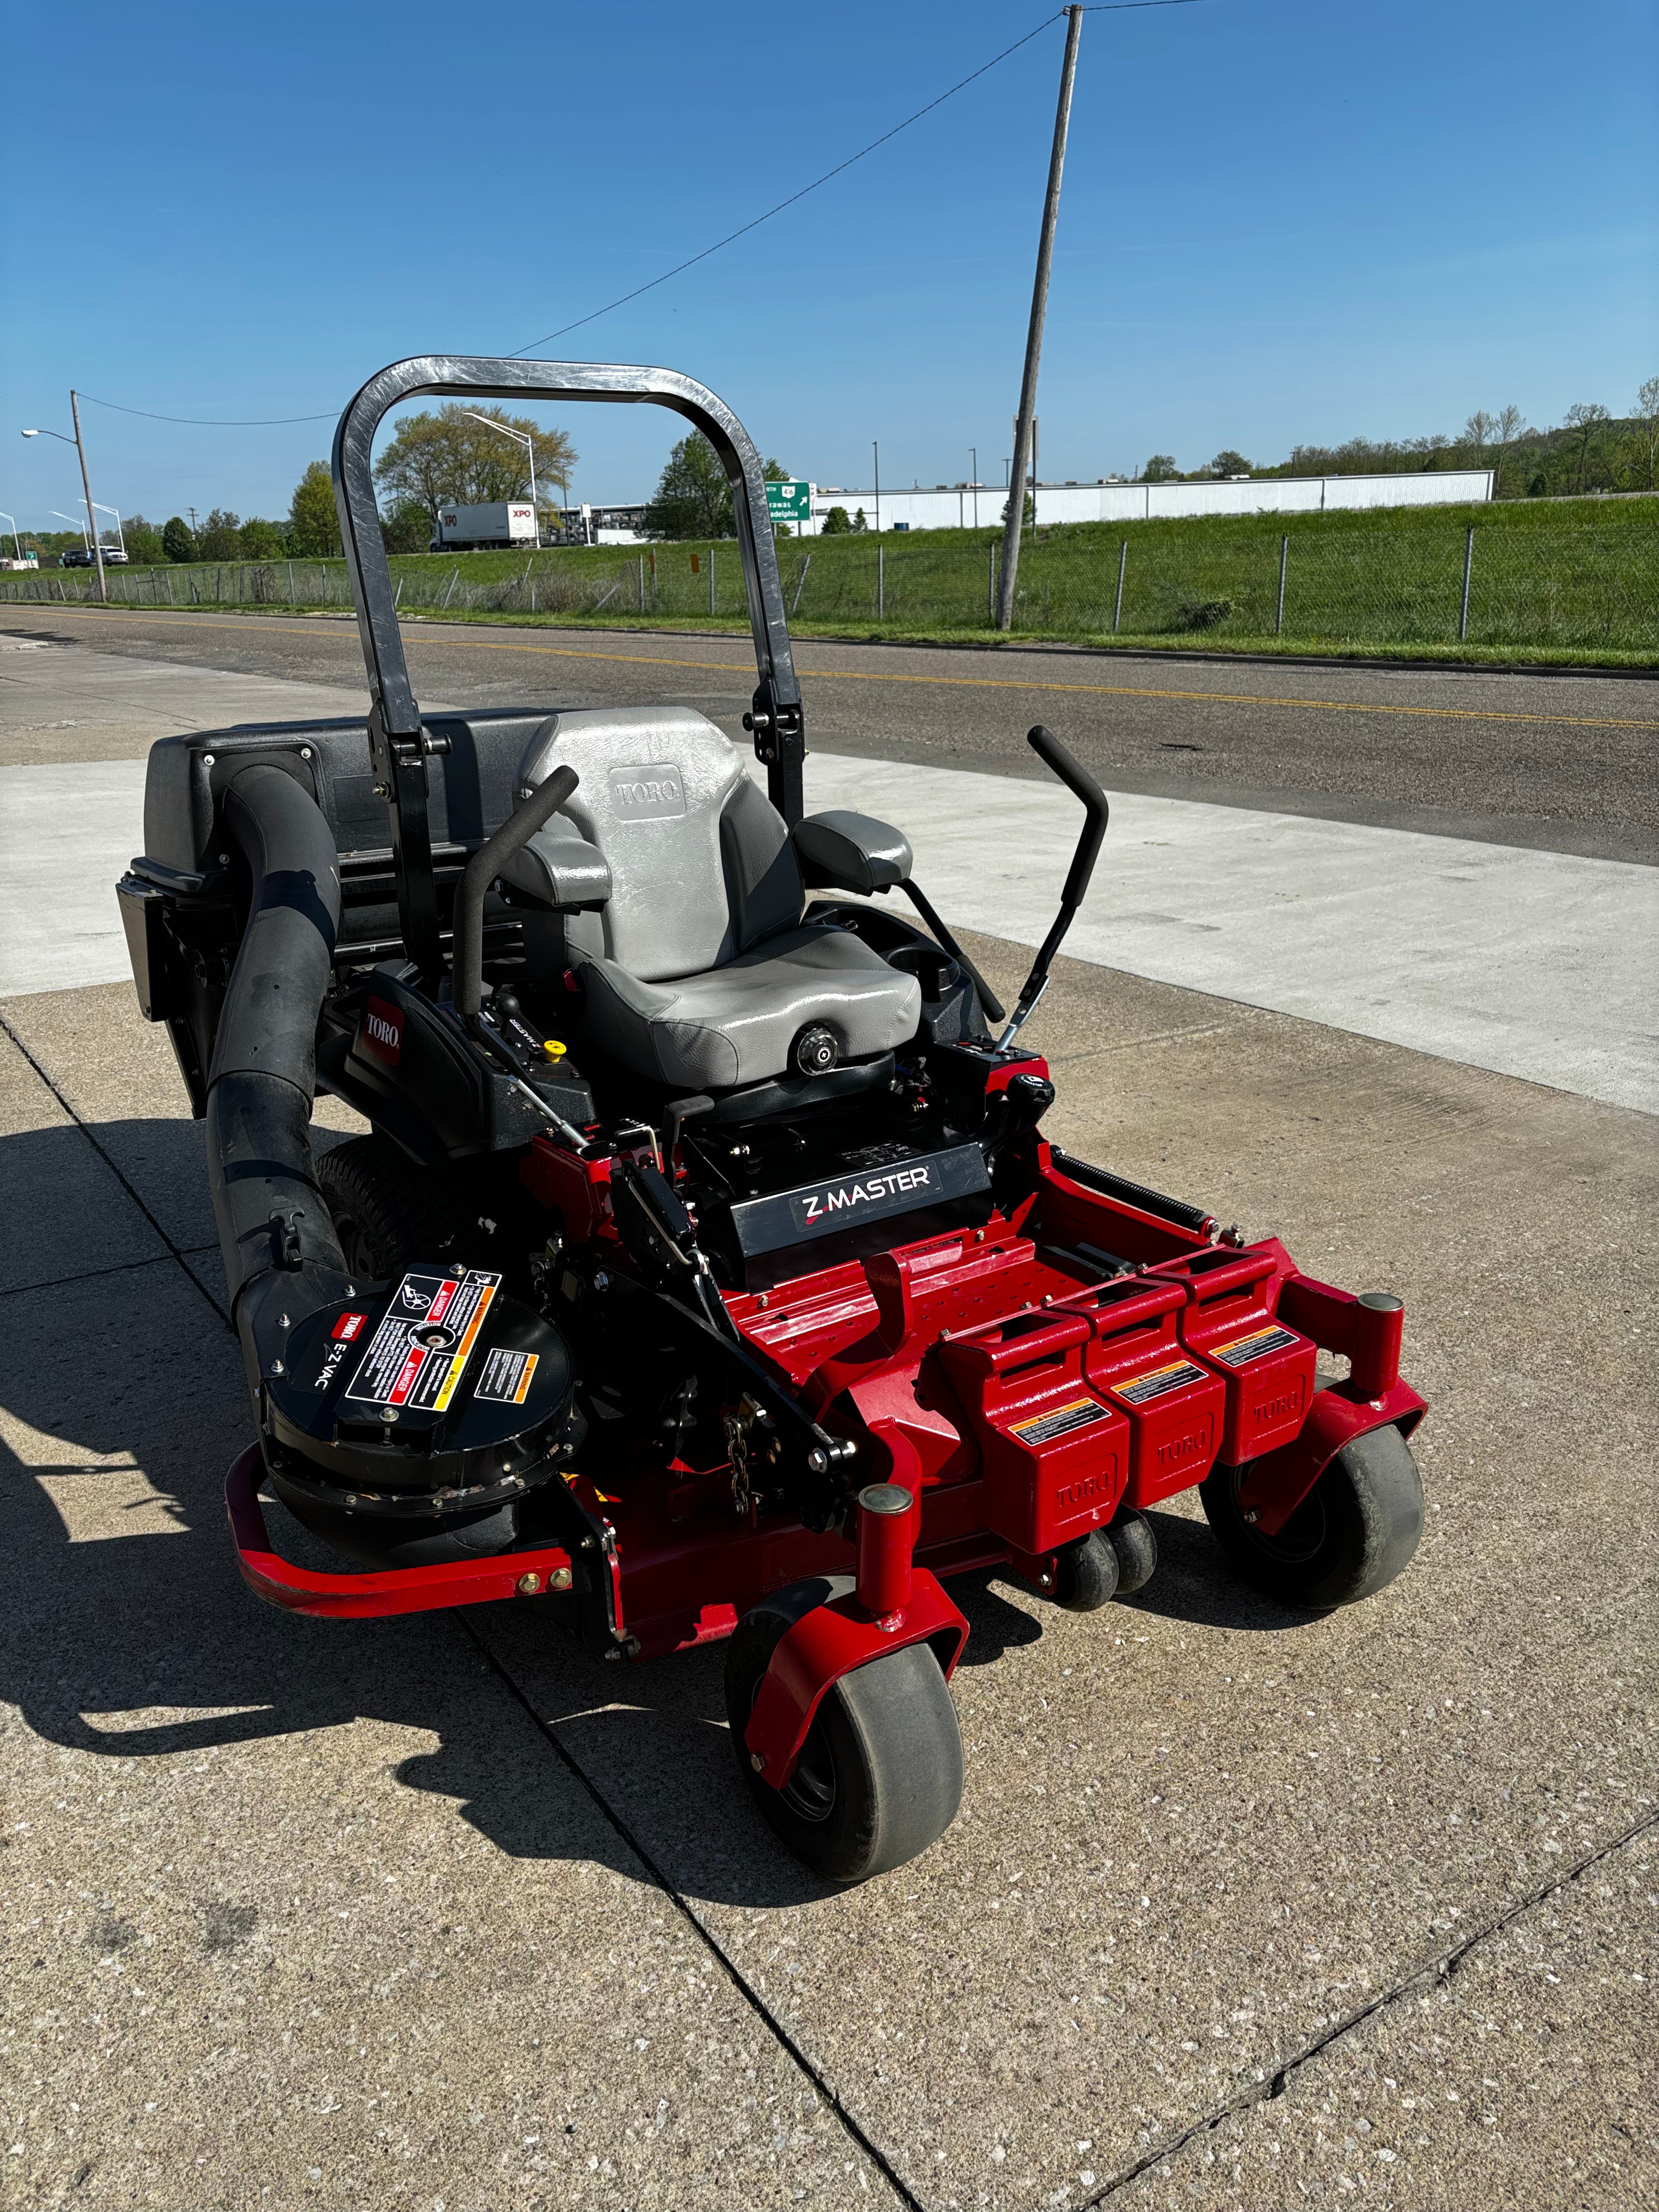 Used Toro Z Master With DFS Bagger